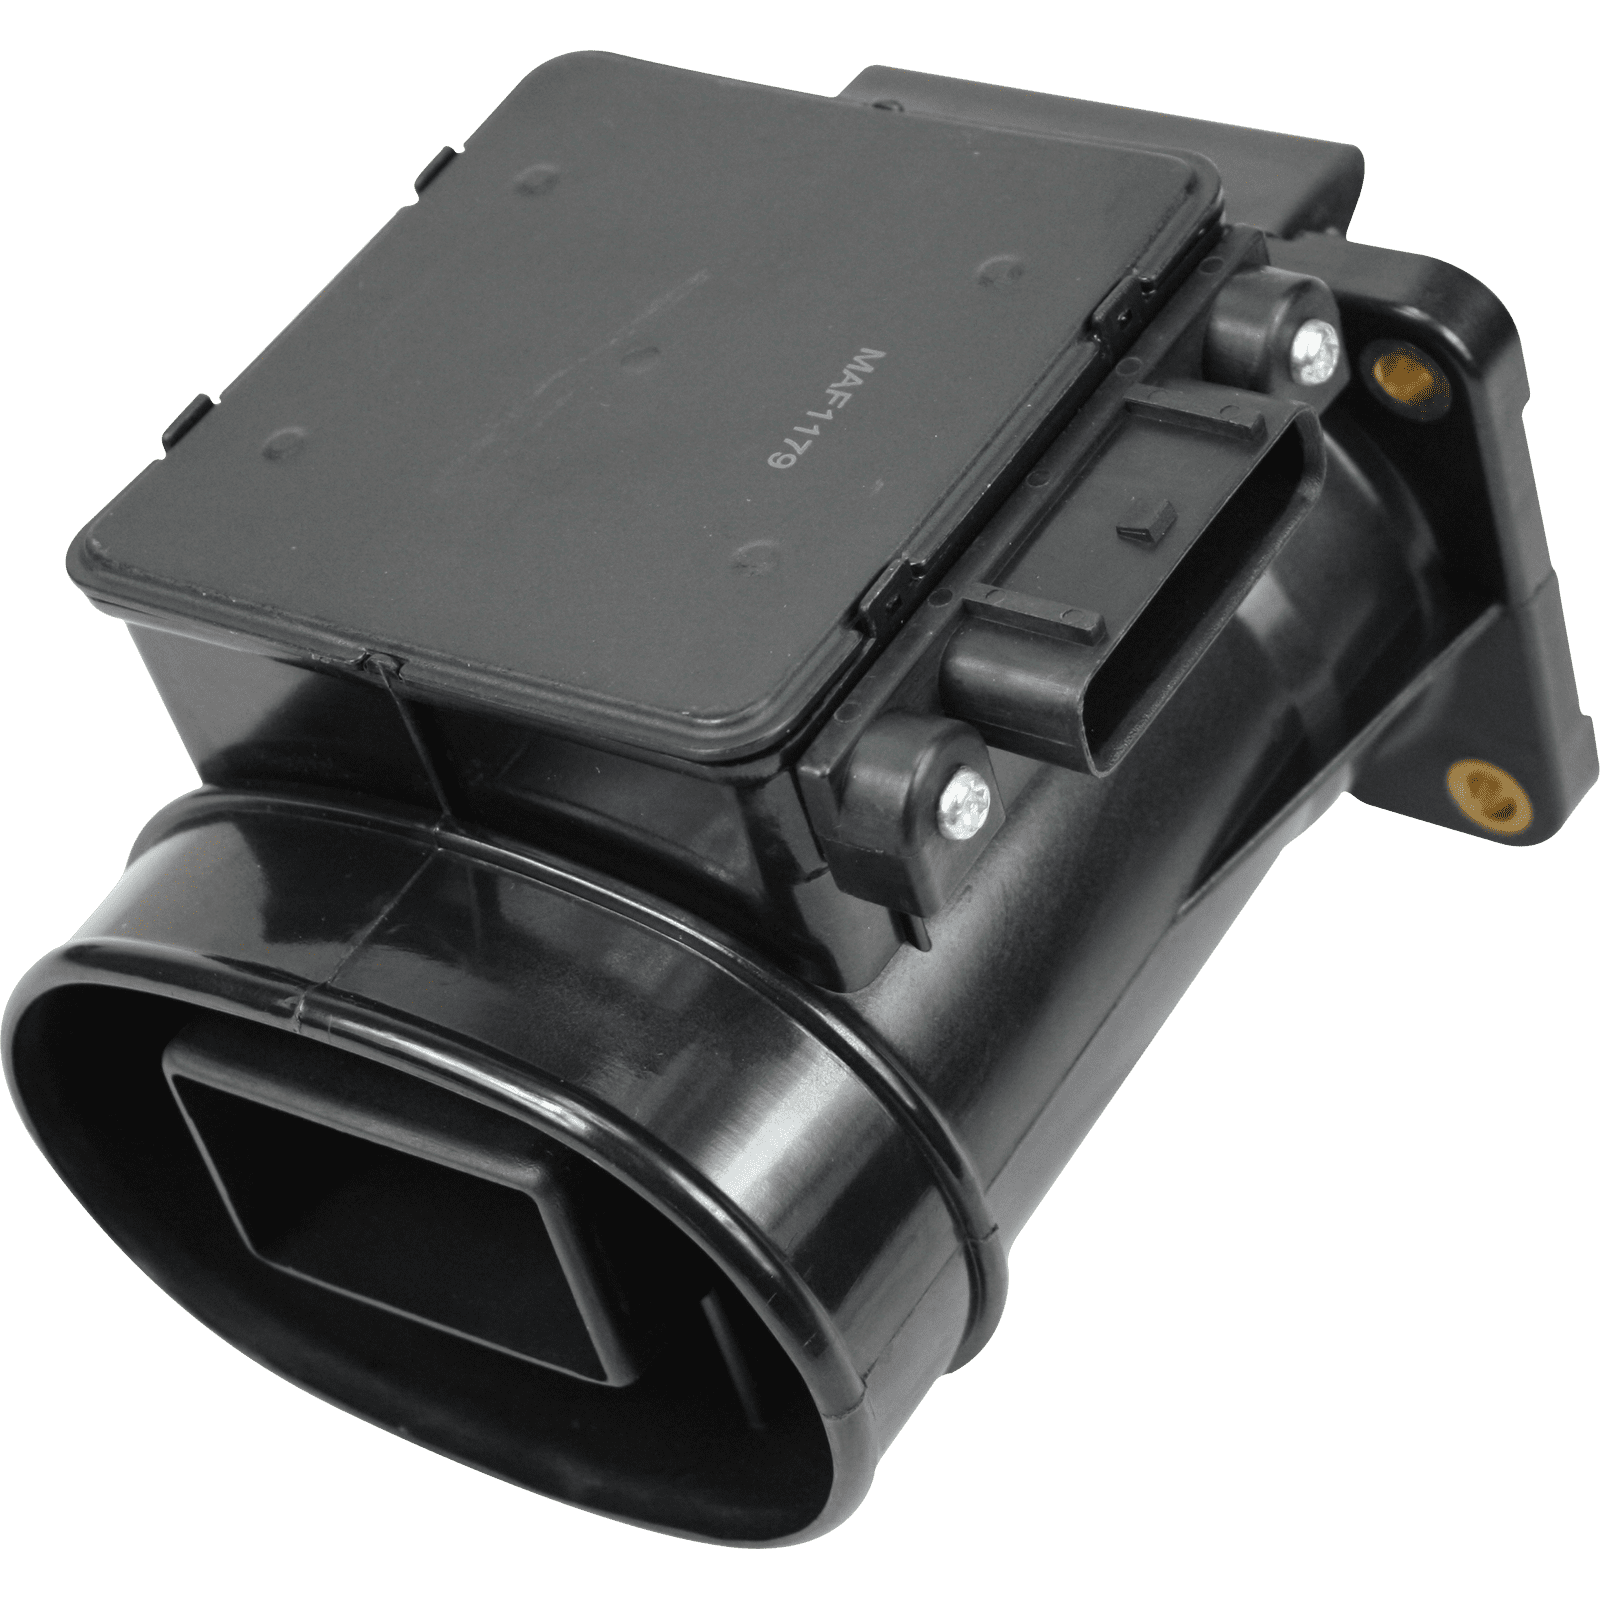 New For 3000GT Colt Galant Mighty Max Stealth Mass Air Flow Sensor Meter MAF